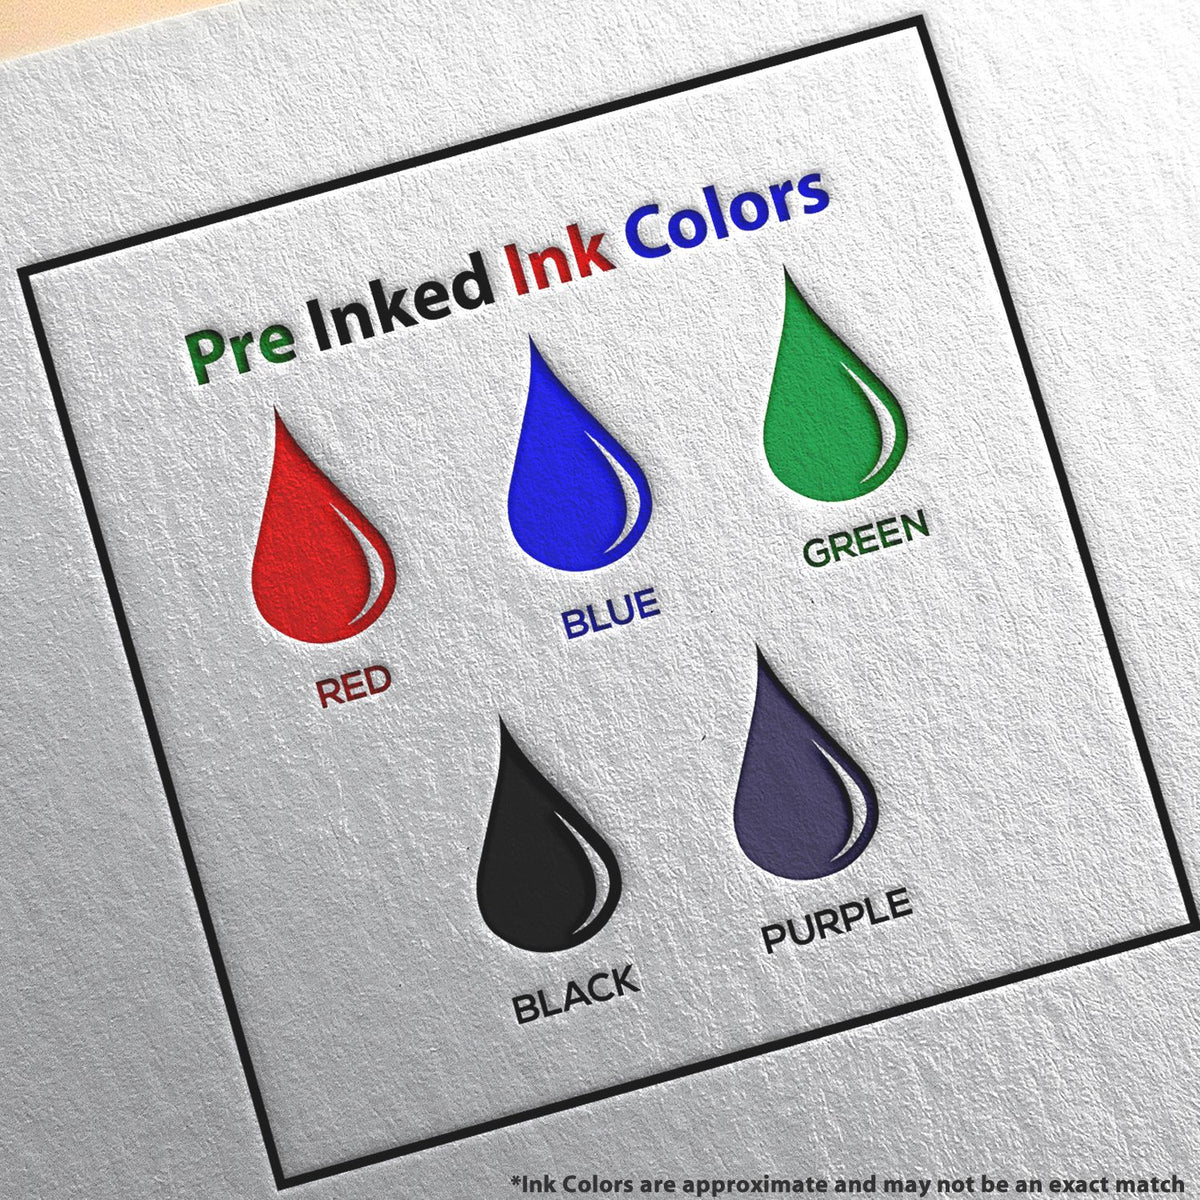 A picture showing the different ink colors or hues available for the Slim Pre-Inked North Dakota Architect Seal Stamp product.